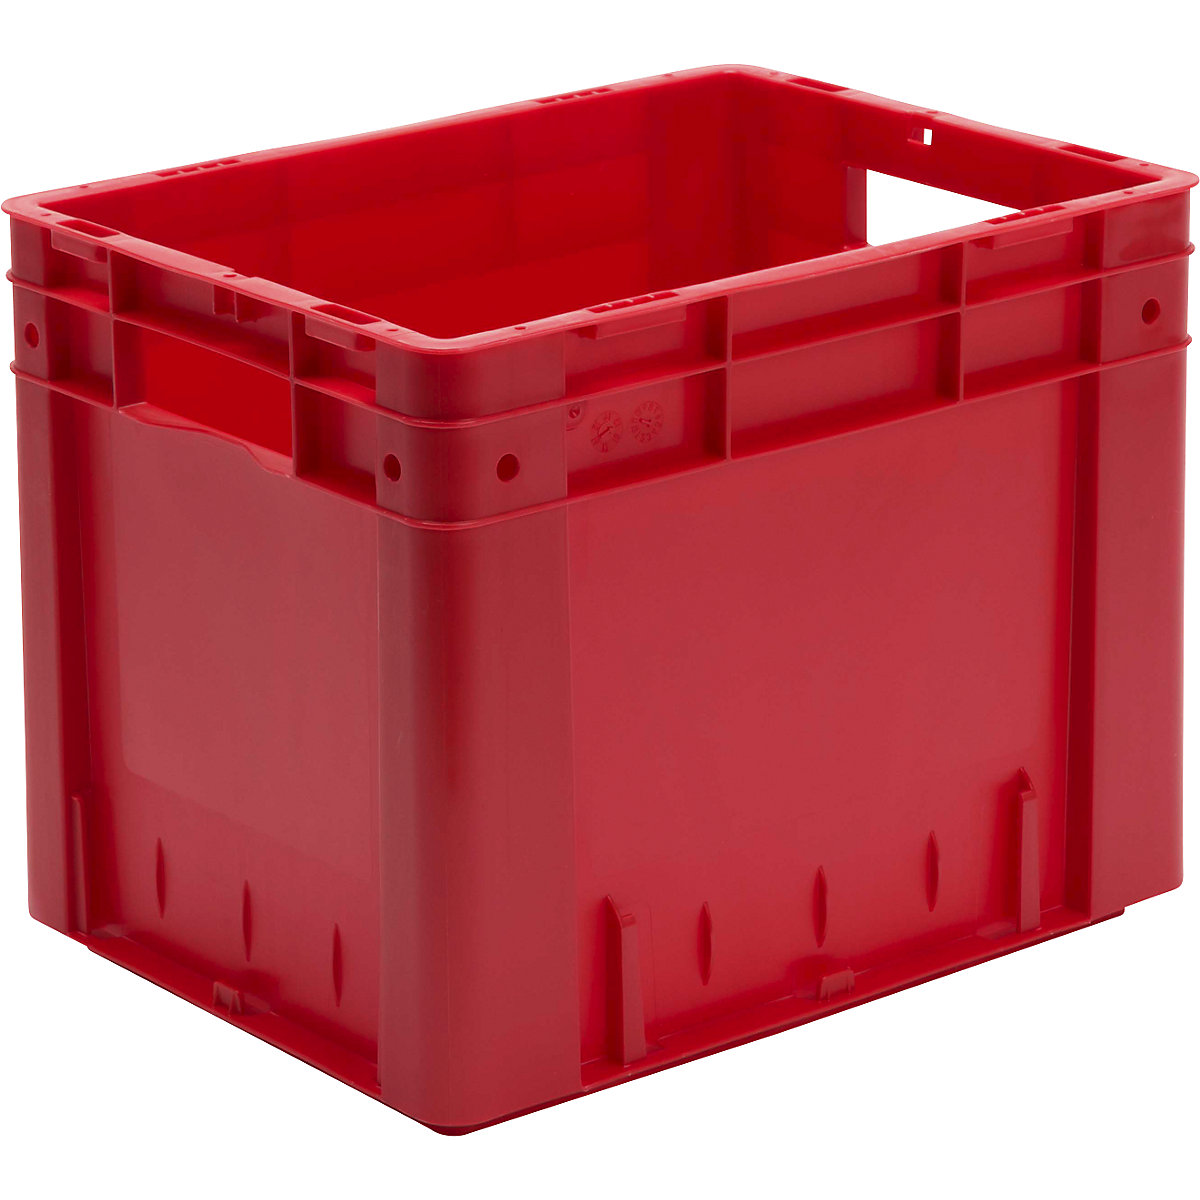 Euro stacking container, capacity 29 l, LxWxH 400 x 300 x 320 mm, pack of 4, red-4